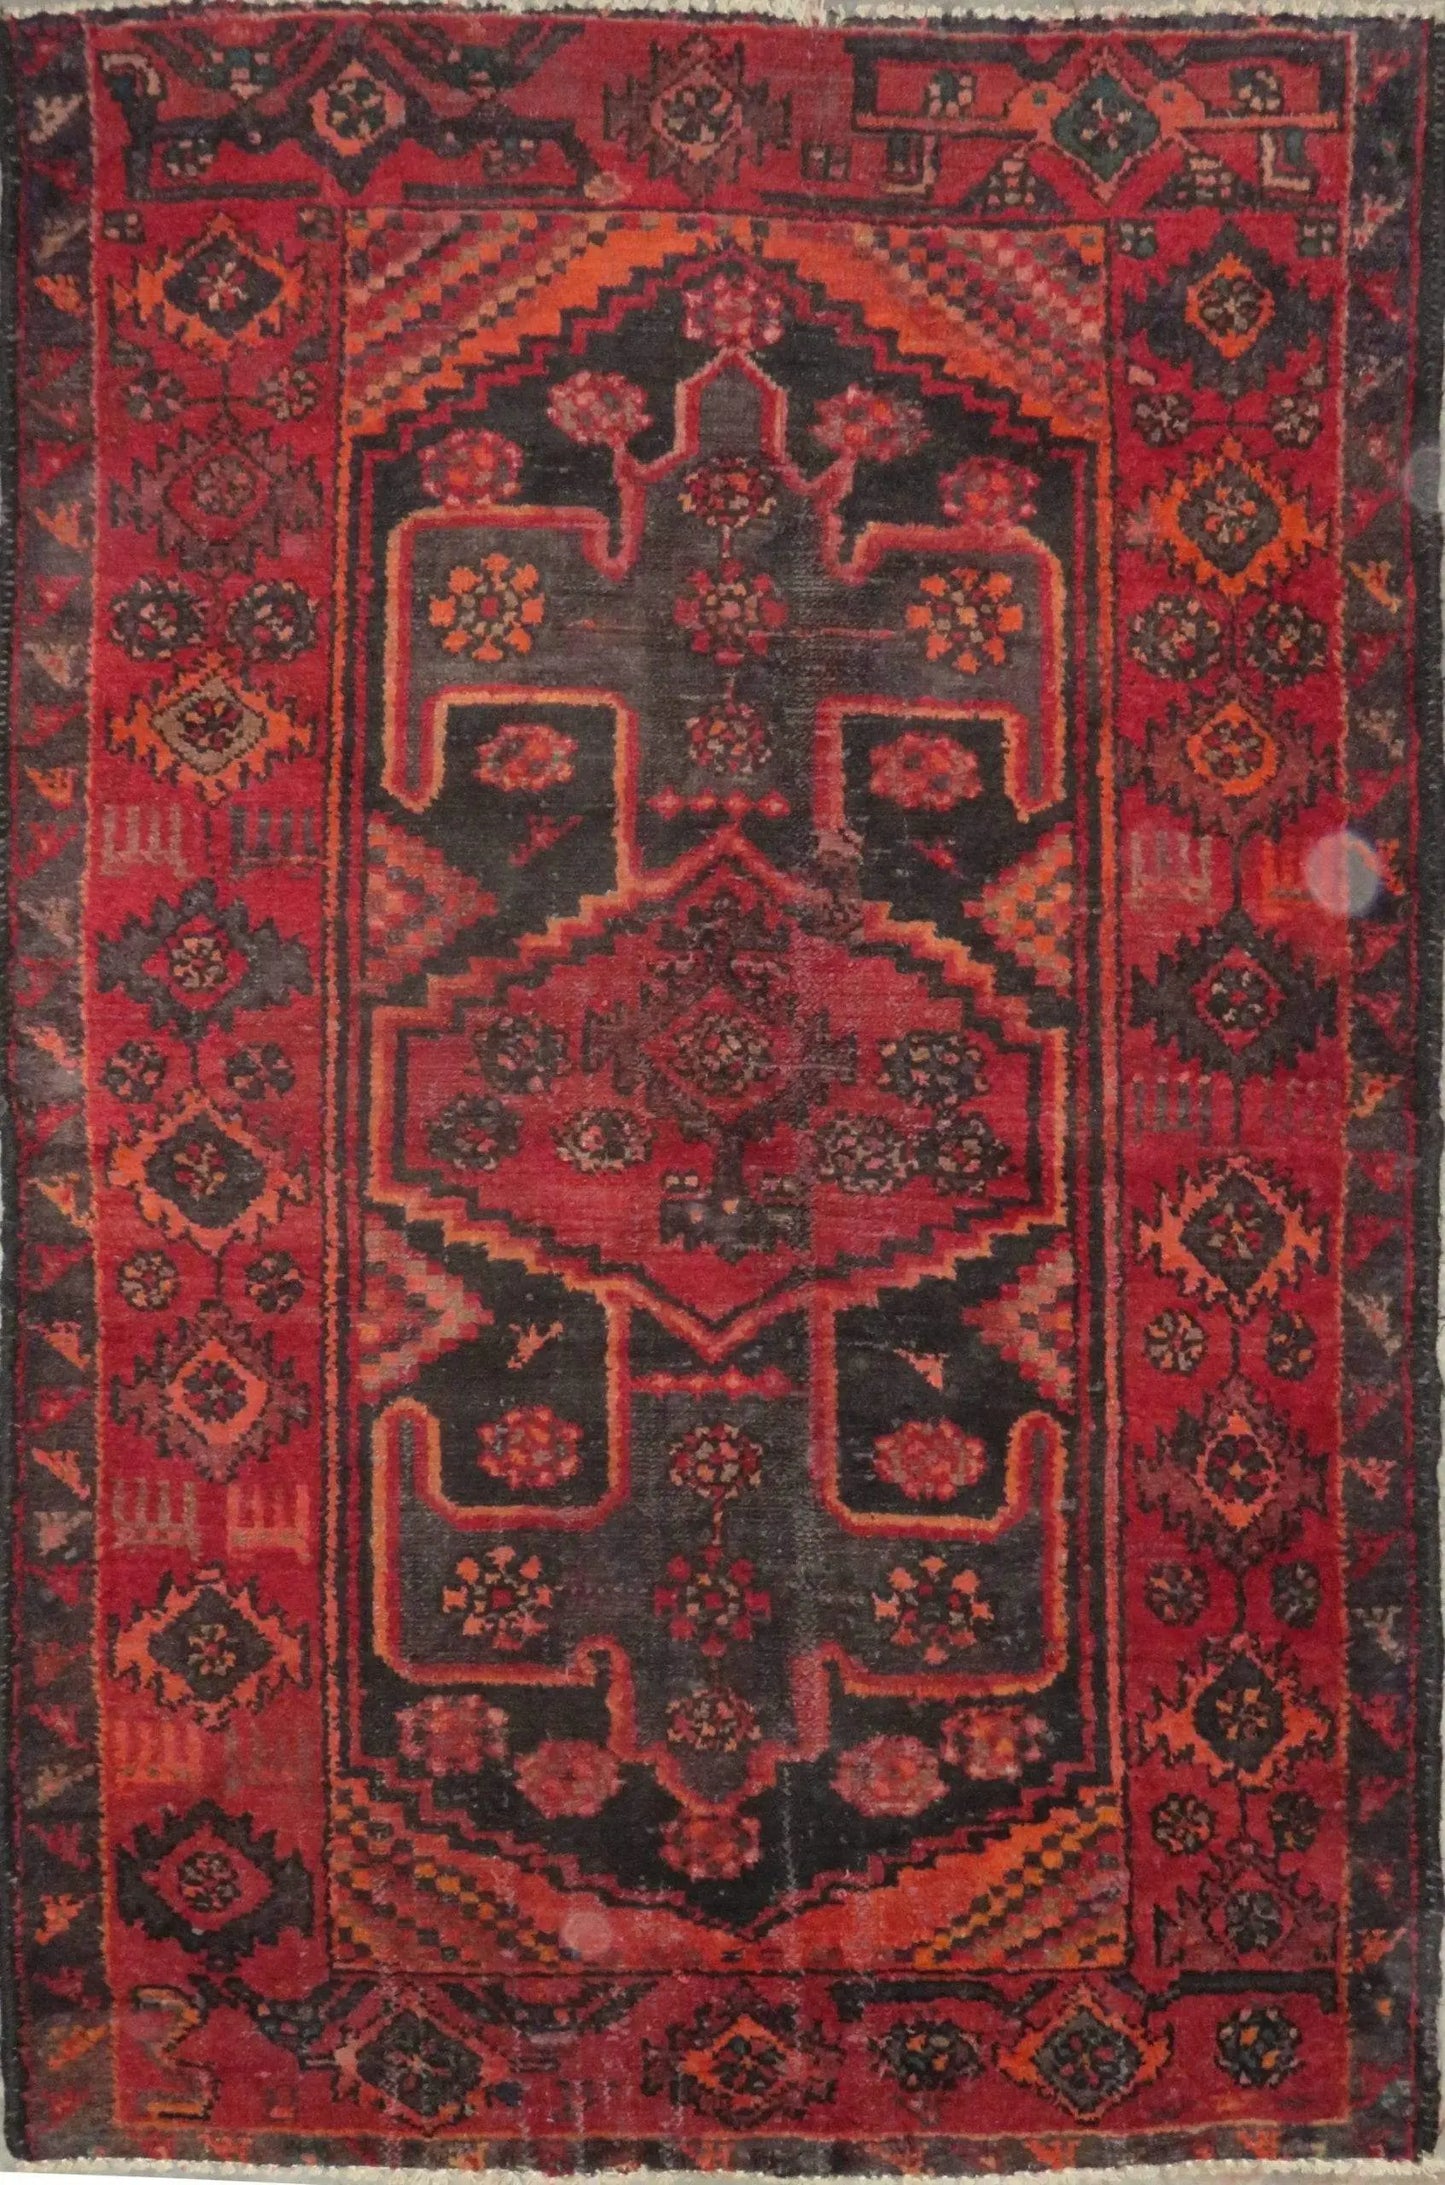 Hand-Knotted Persian Wool Rug _ Luxurious Vintage Design, 5'6" x 3'7", Artisan Crafted